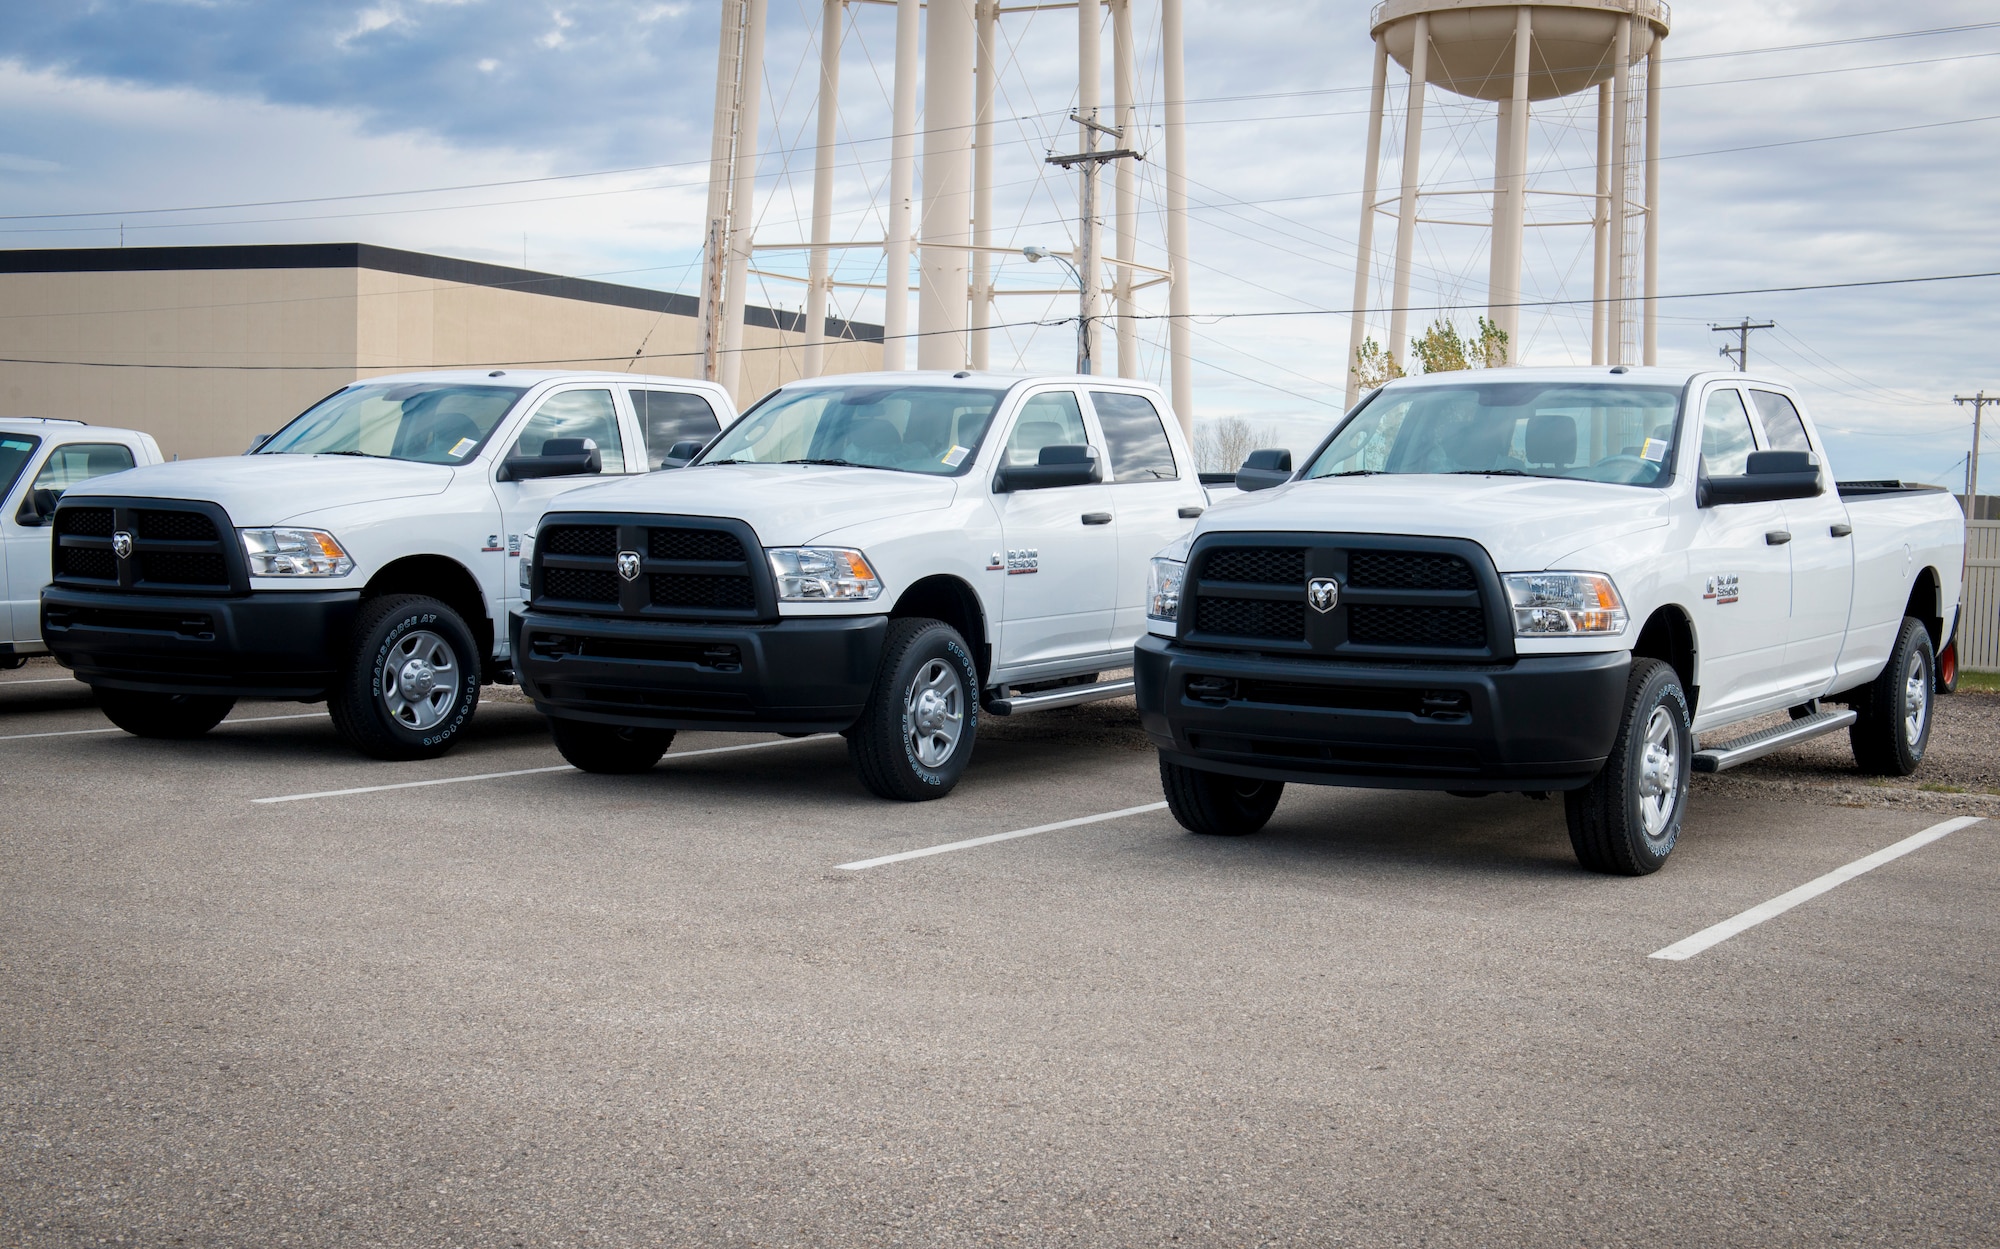 Brand new Dodge Ram 3500s sit in a parking lot on Minot Air Force Base, N.D., Oct. 29, 2014. The trucks were bought as a part of the Force Improvement Program’s initiative to provide more positive, rapid and substantial changes within the ICBM and bomber missions. Because the old vehicles weren’t designed to be on Minot’s dirt roads consistently, driving along the roads full of gear and Airmen has worn down the suspension and transmissions over time. (U.S. Air Force photo/Airman 1st Class Sahara L. Fales)